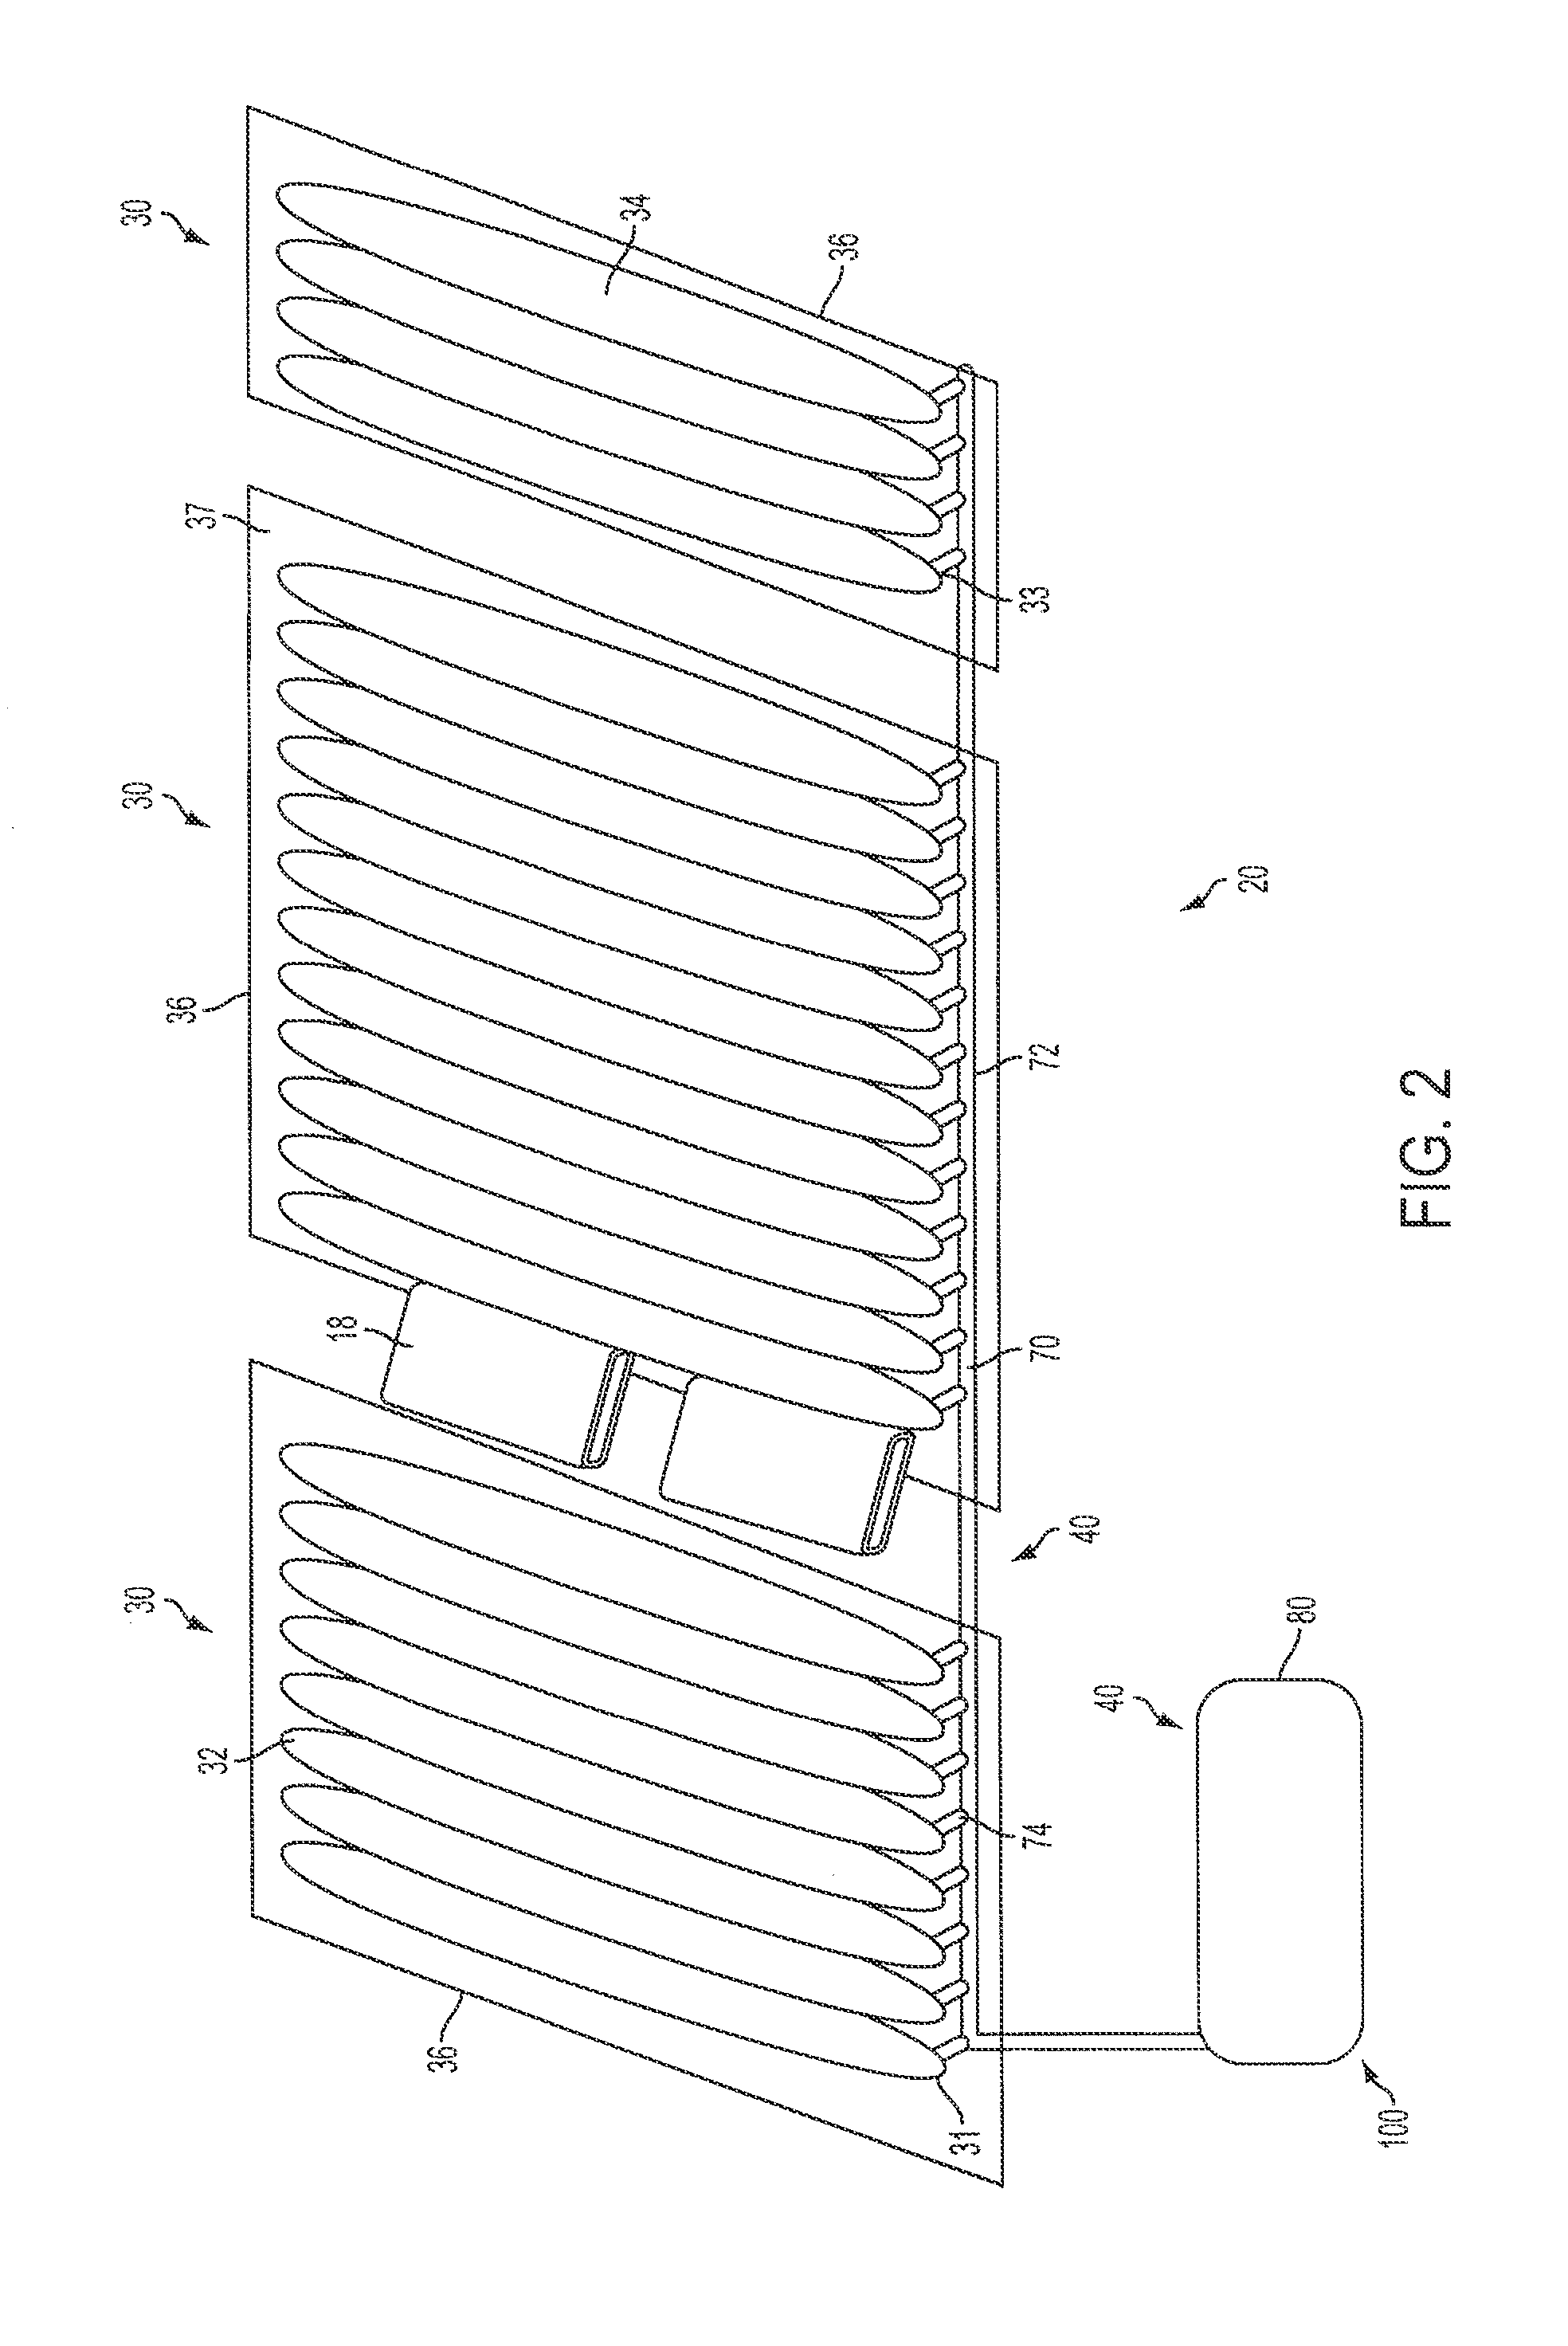 Patient support system and method